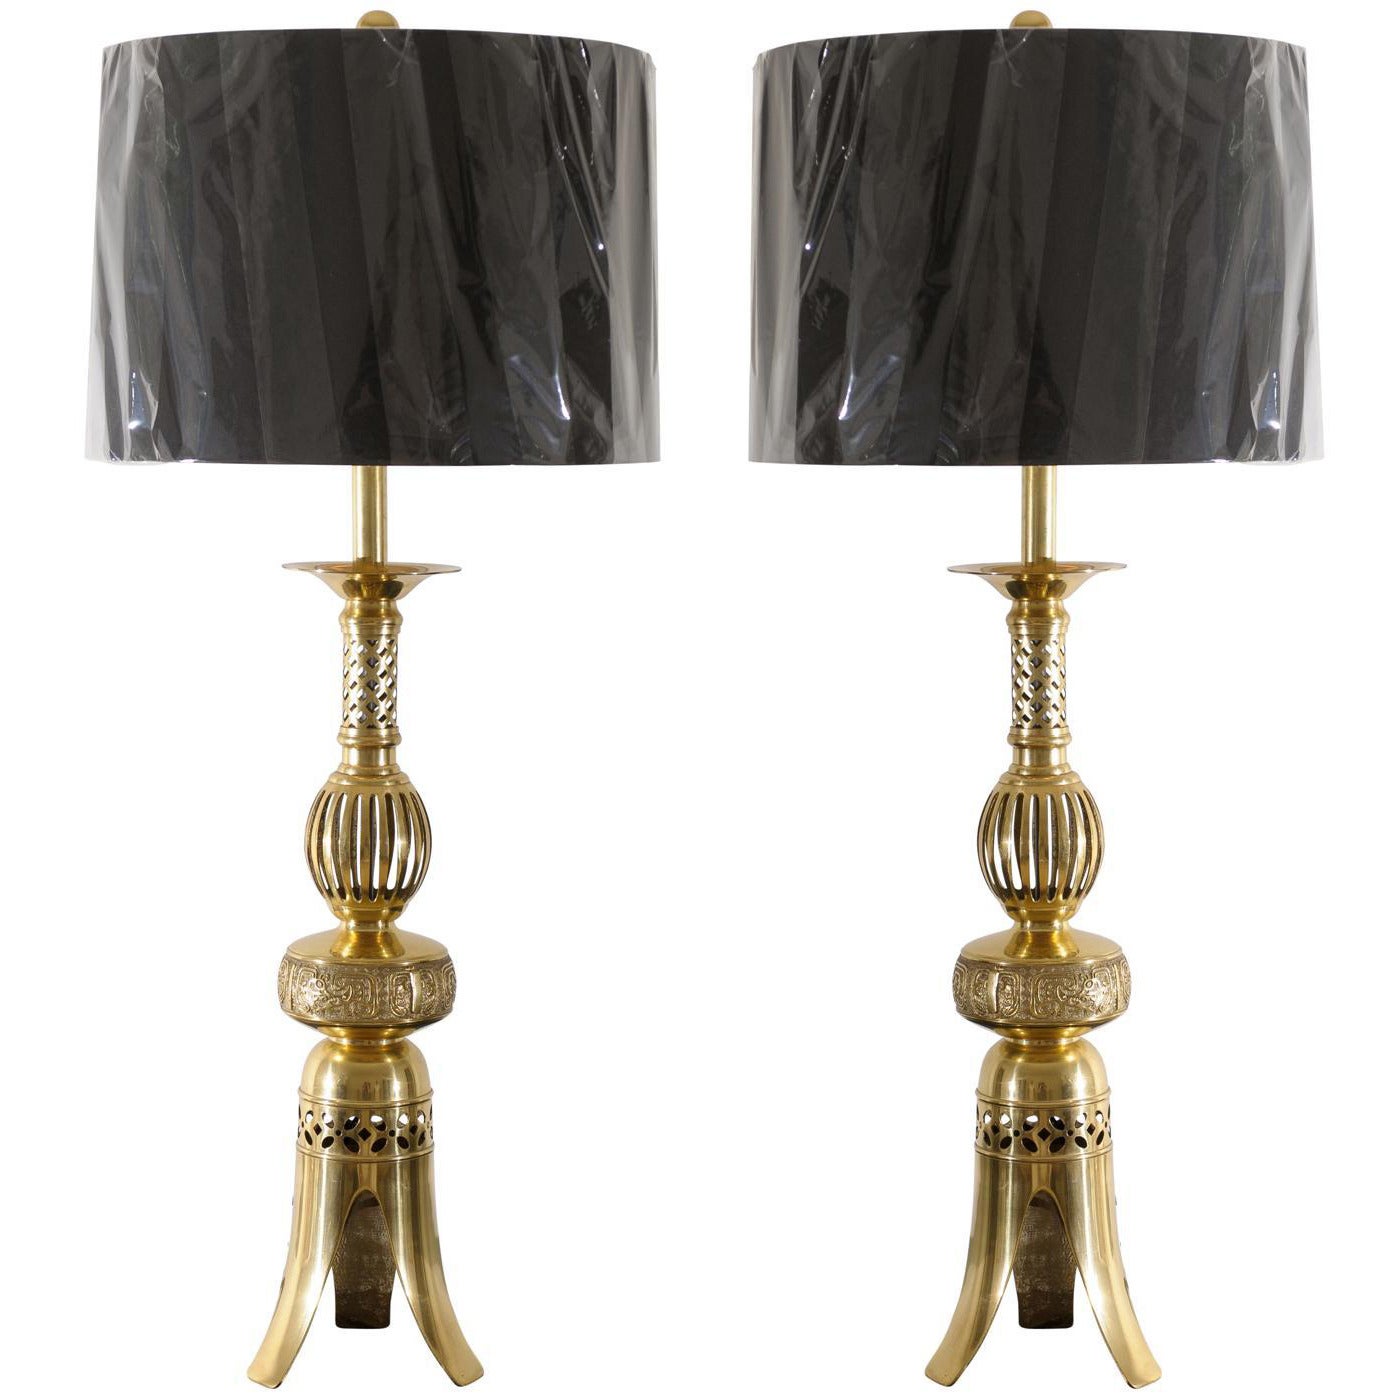 Pair of Brass Asian Lamps by Frederick Cooper